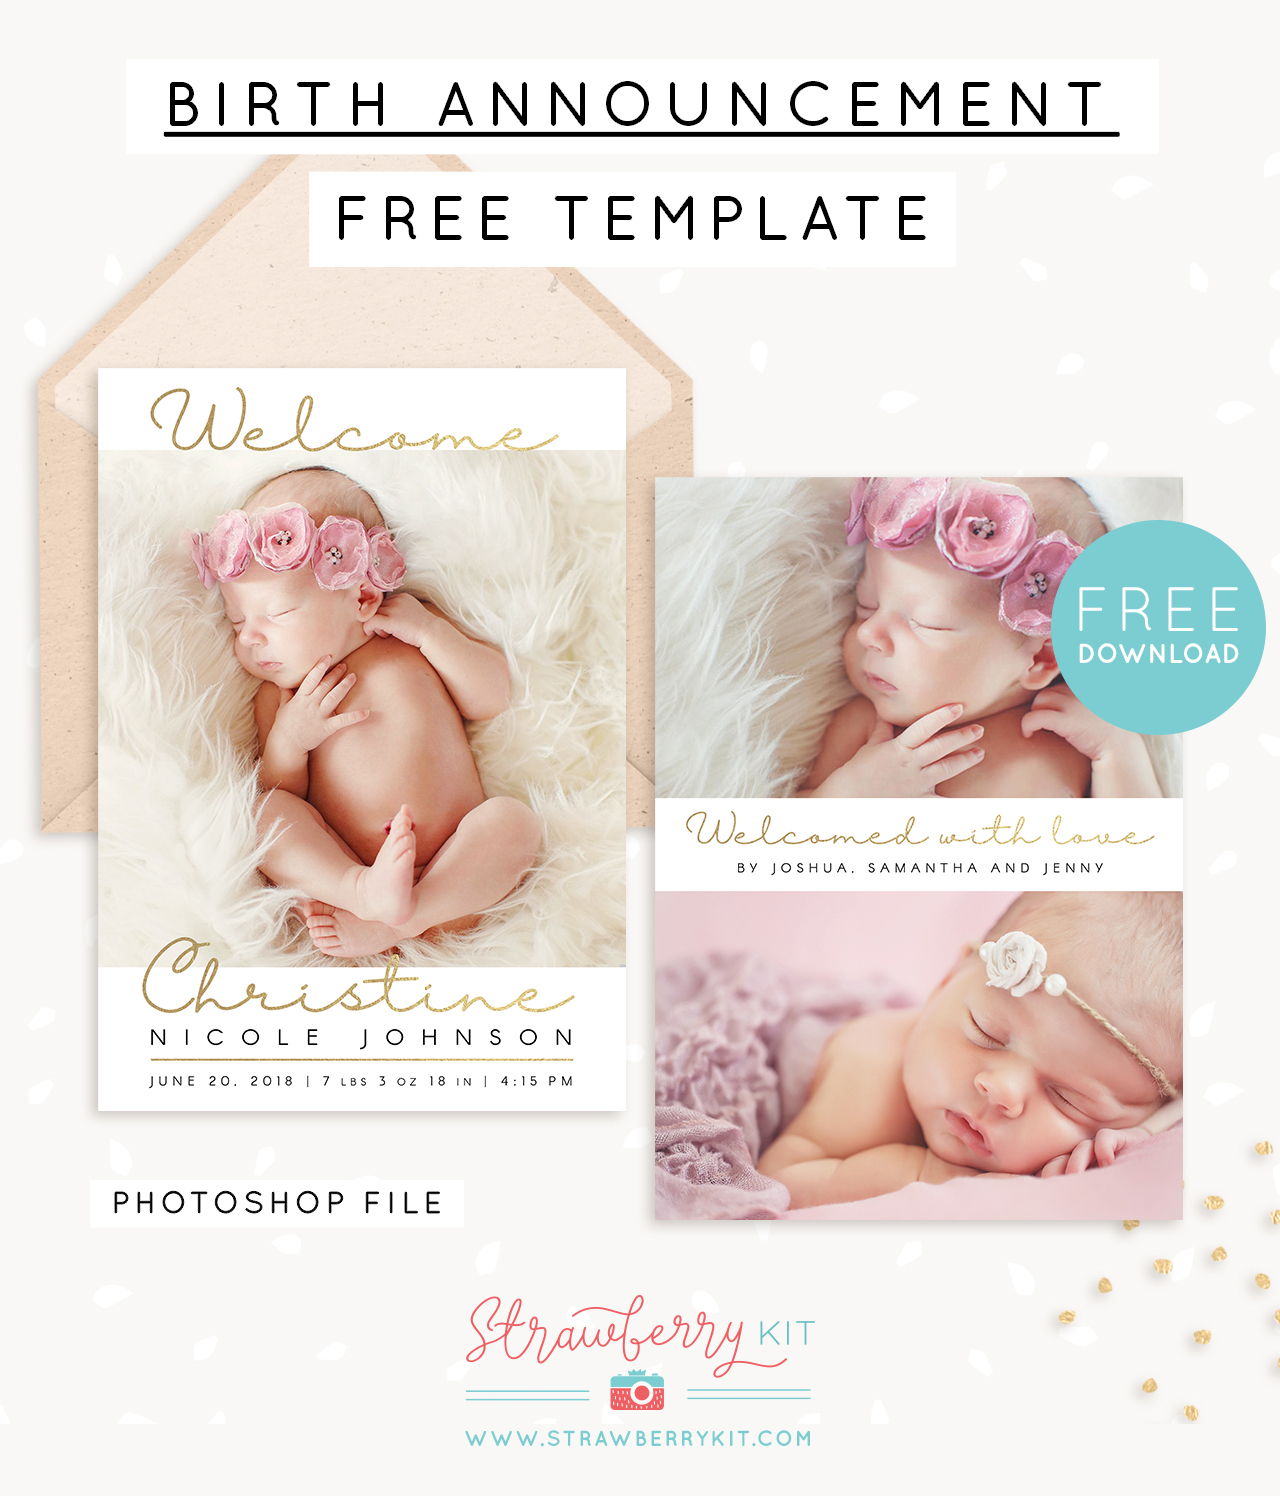 Free Birth Announcement Template For Photoshop Strawberry Kit